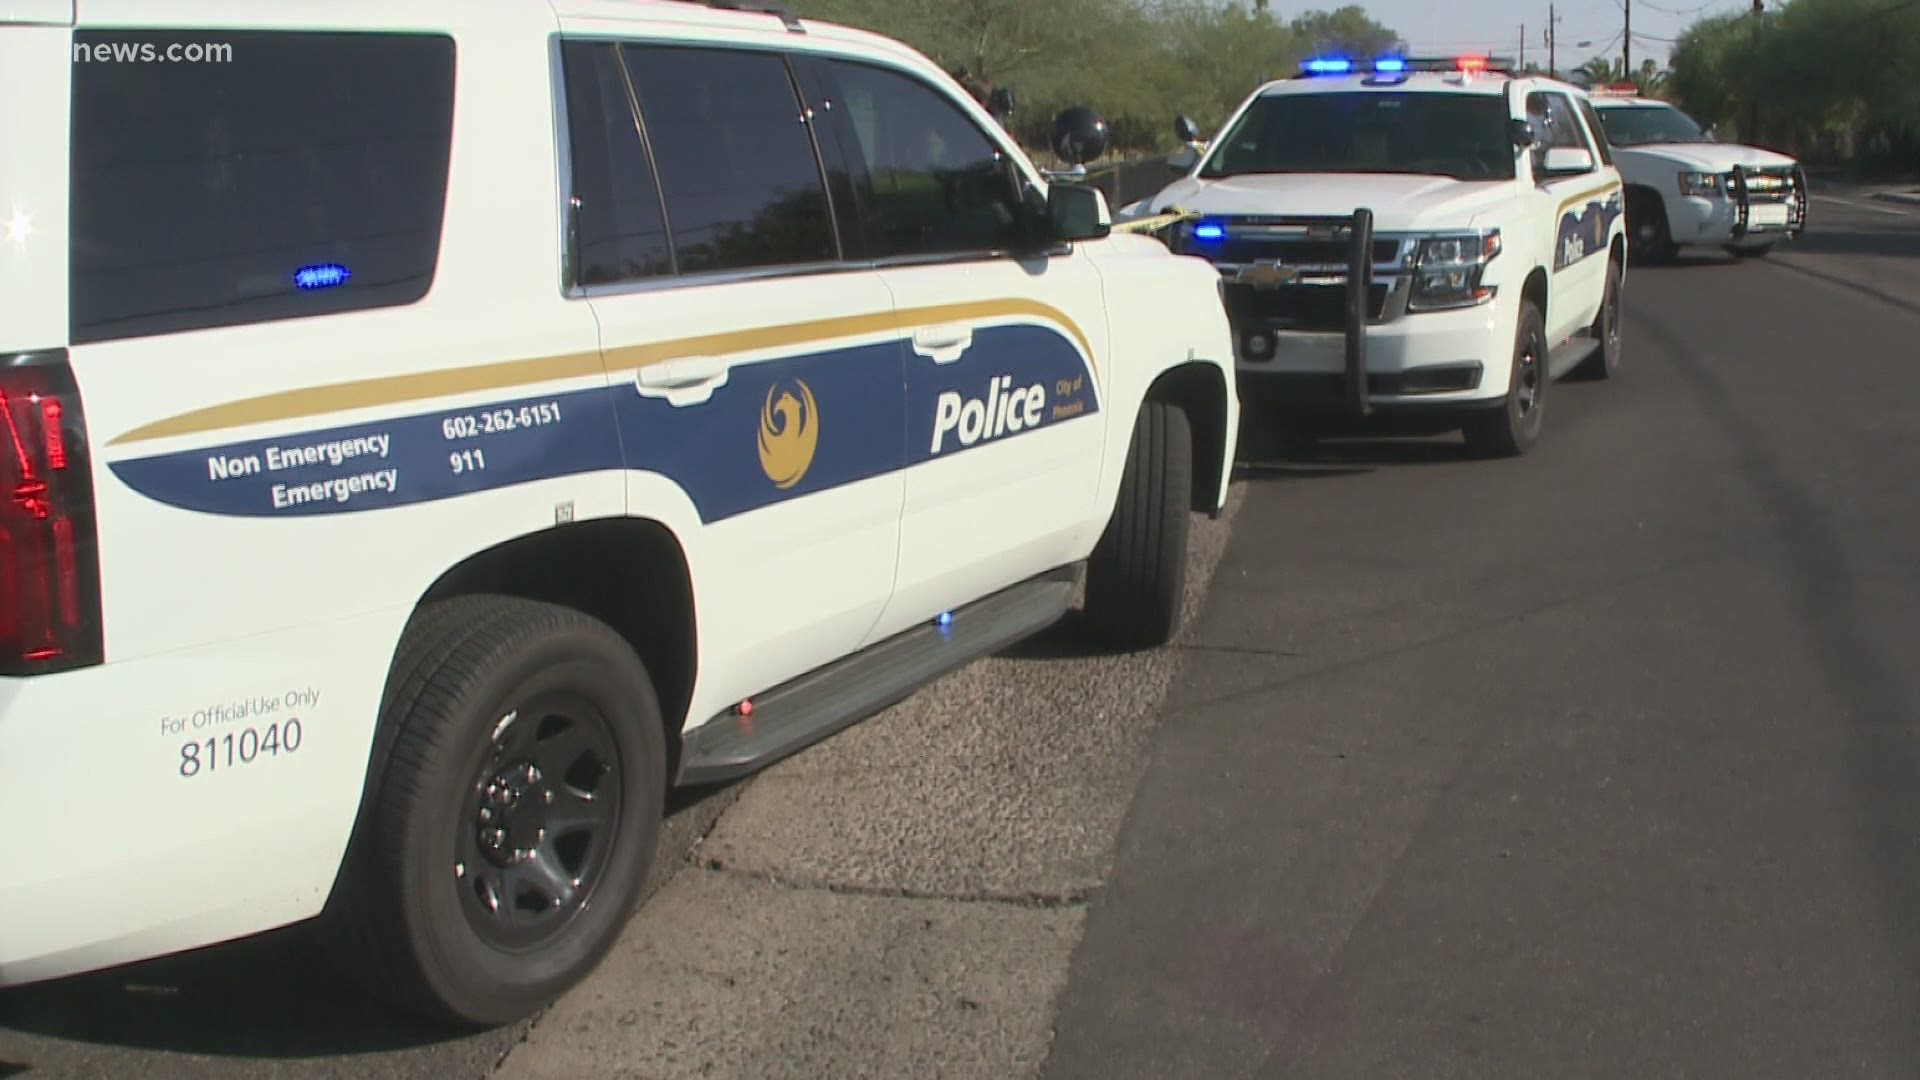 A new proposed contract between the City of Phoenix and the Phoenix Law Enforcement Association is focused on accountability. Activists say it doesn't go far enough.